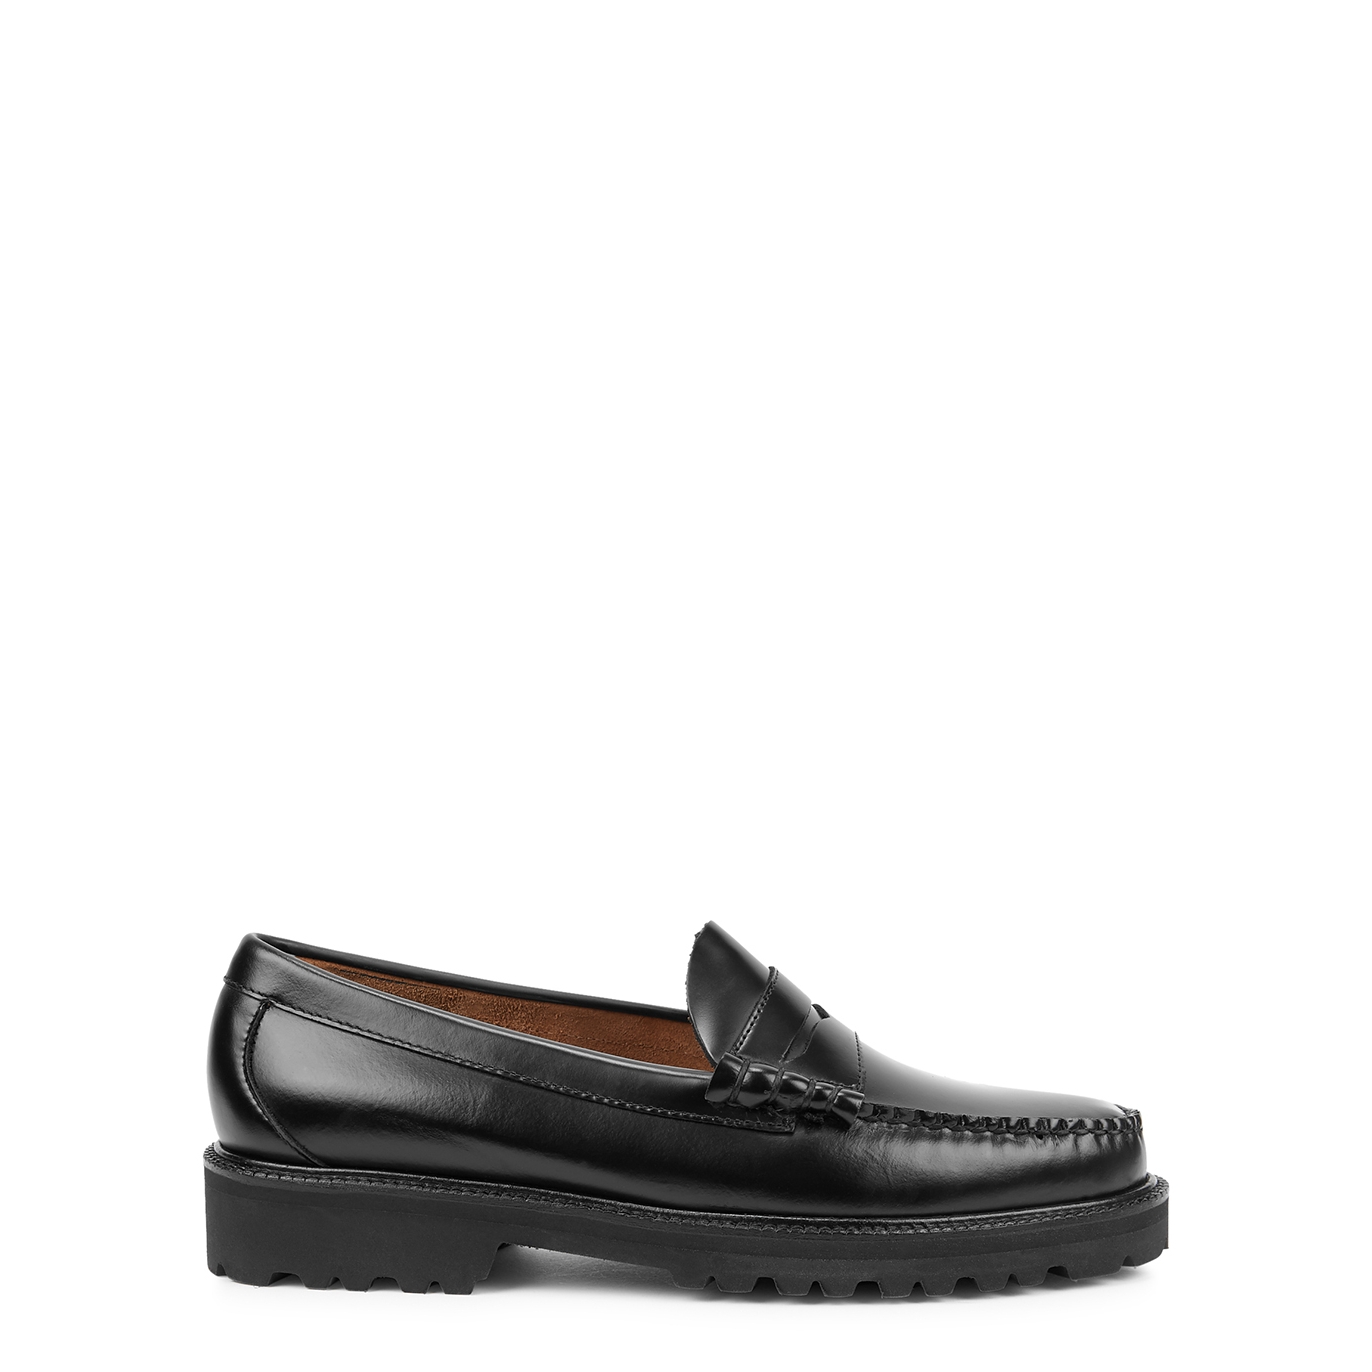 G.H Bass & Co Weejuns 90 Larson Black Leather Loafers - 7